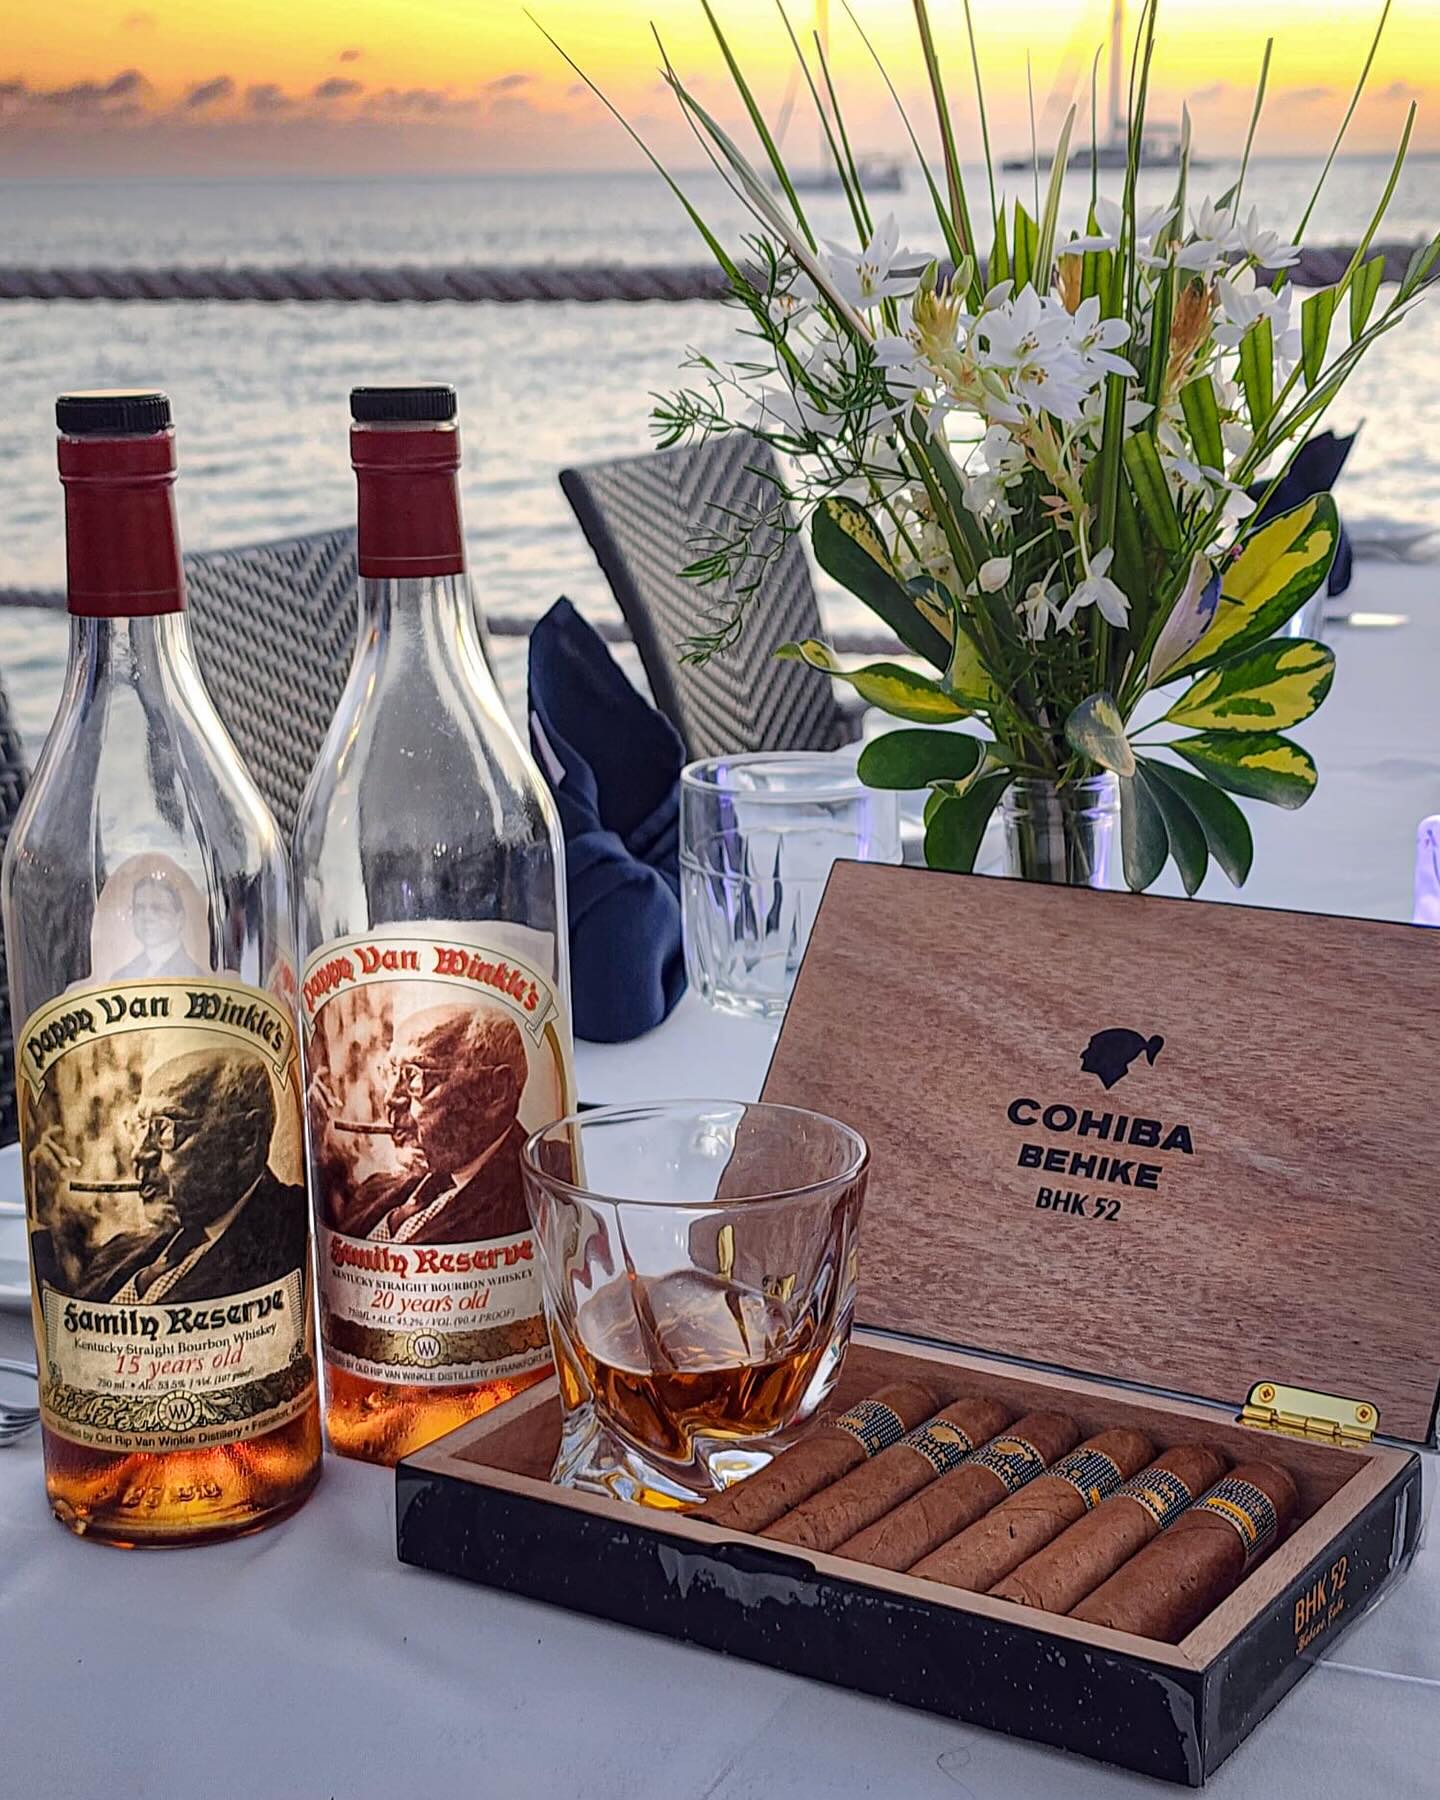 How to Pair Cigars and Drinks for an Ultimate Dining Experience